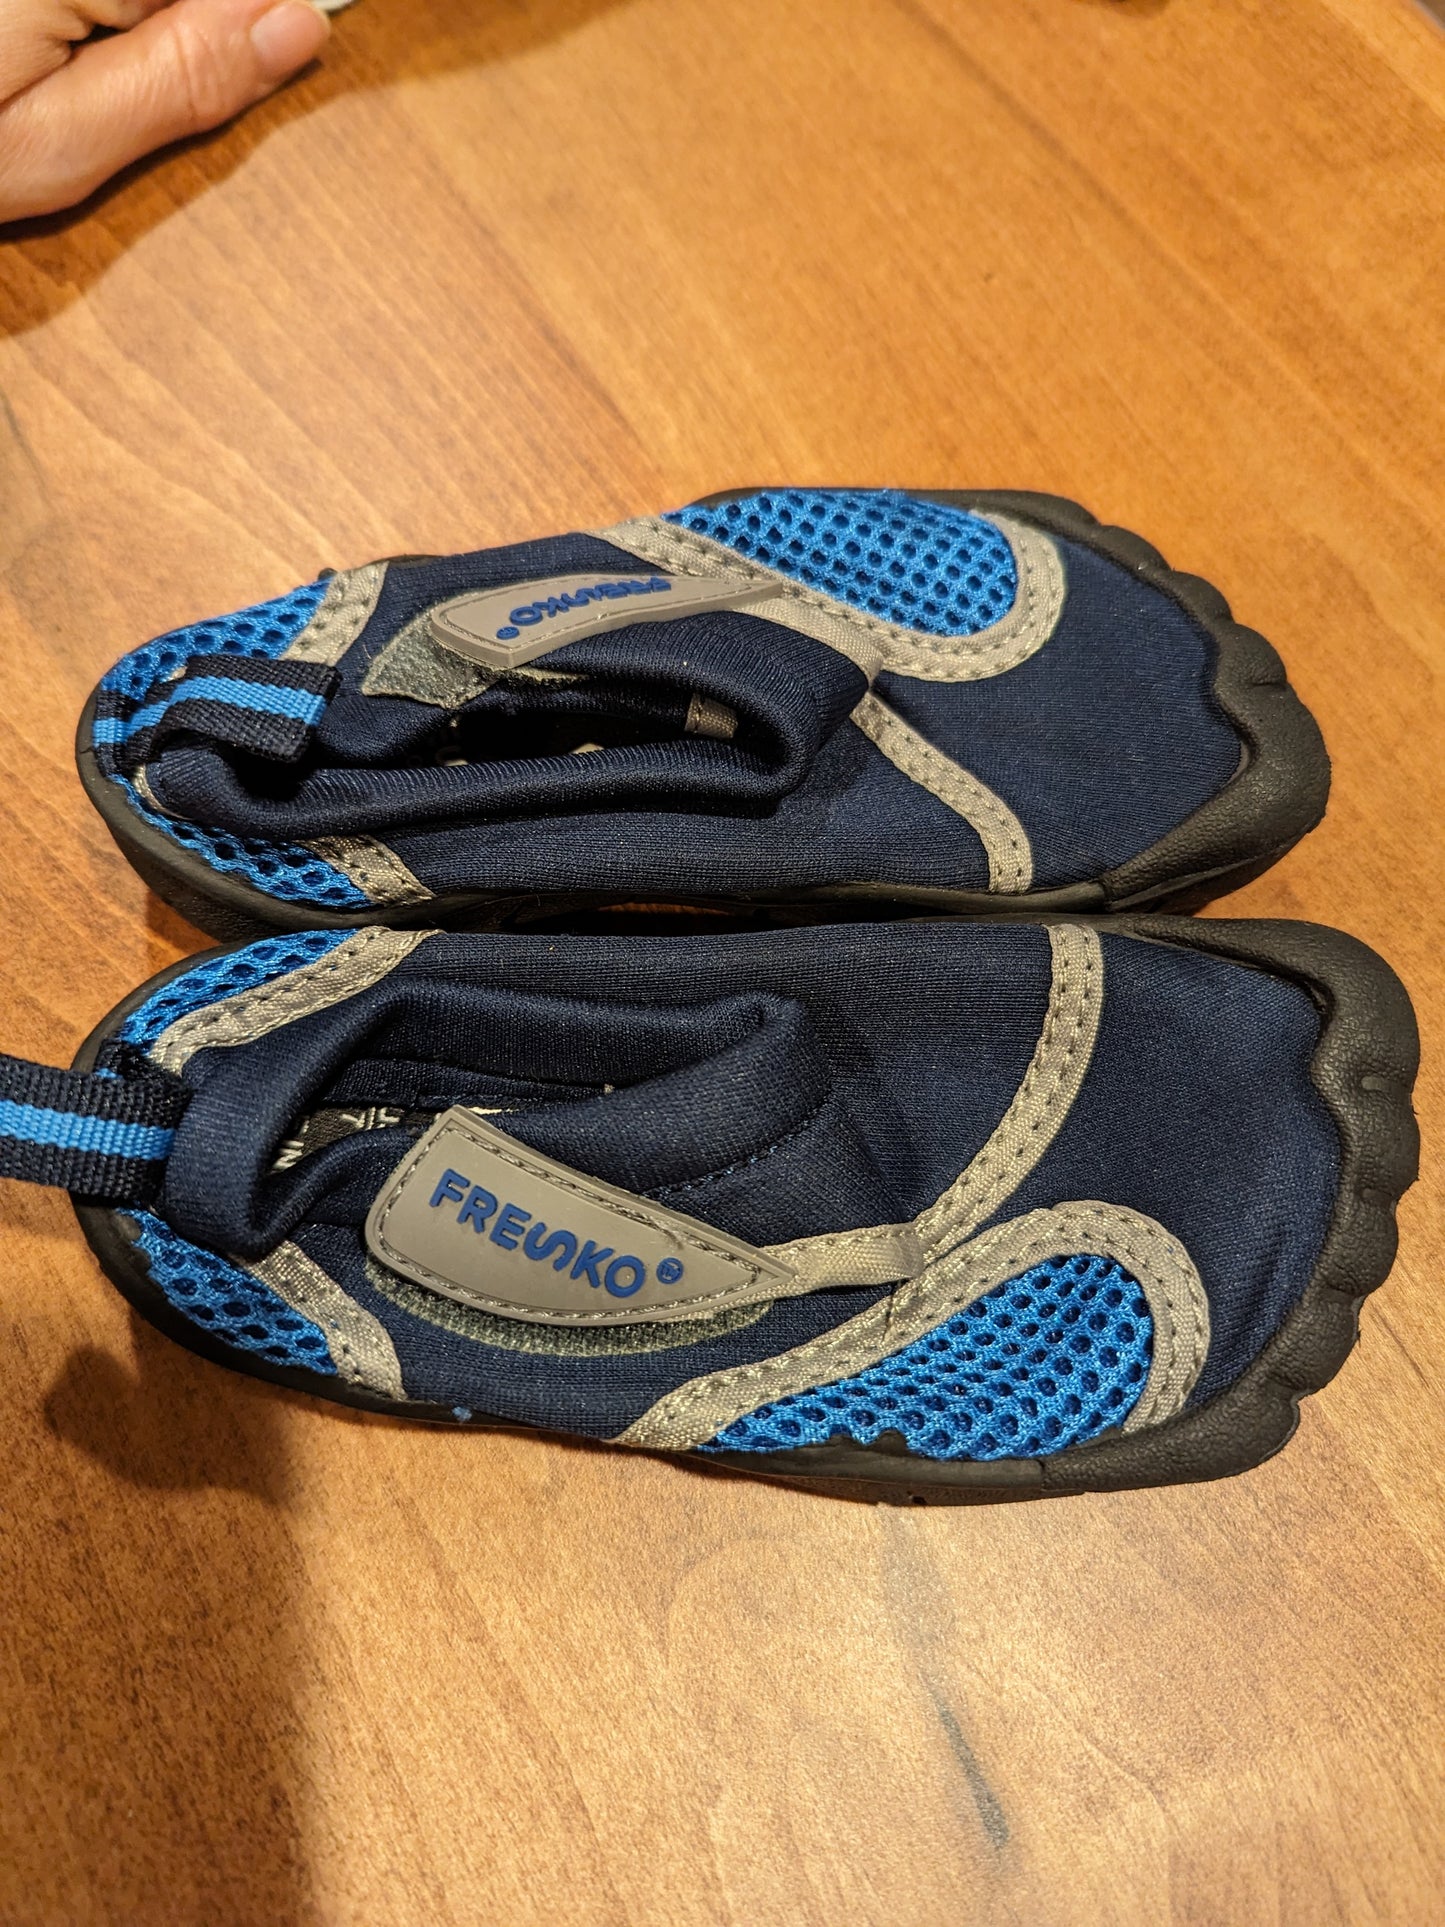 Toddler water shoes - size 7